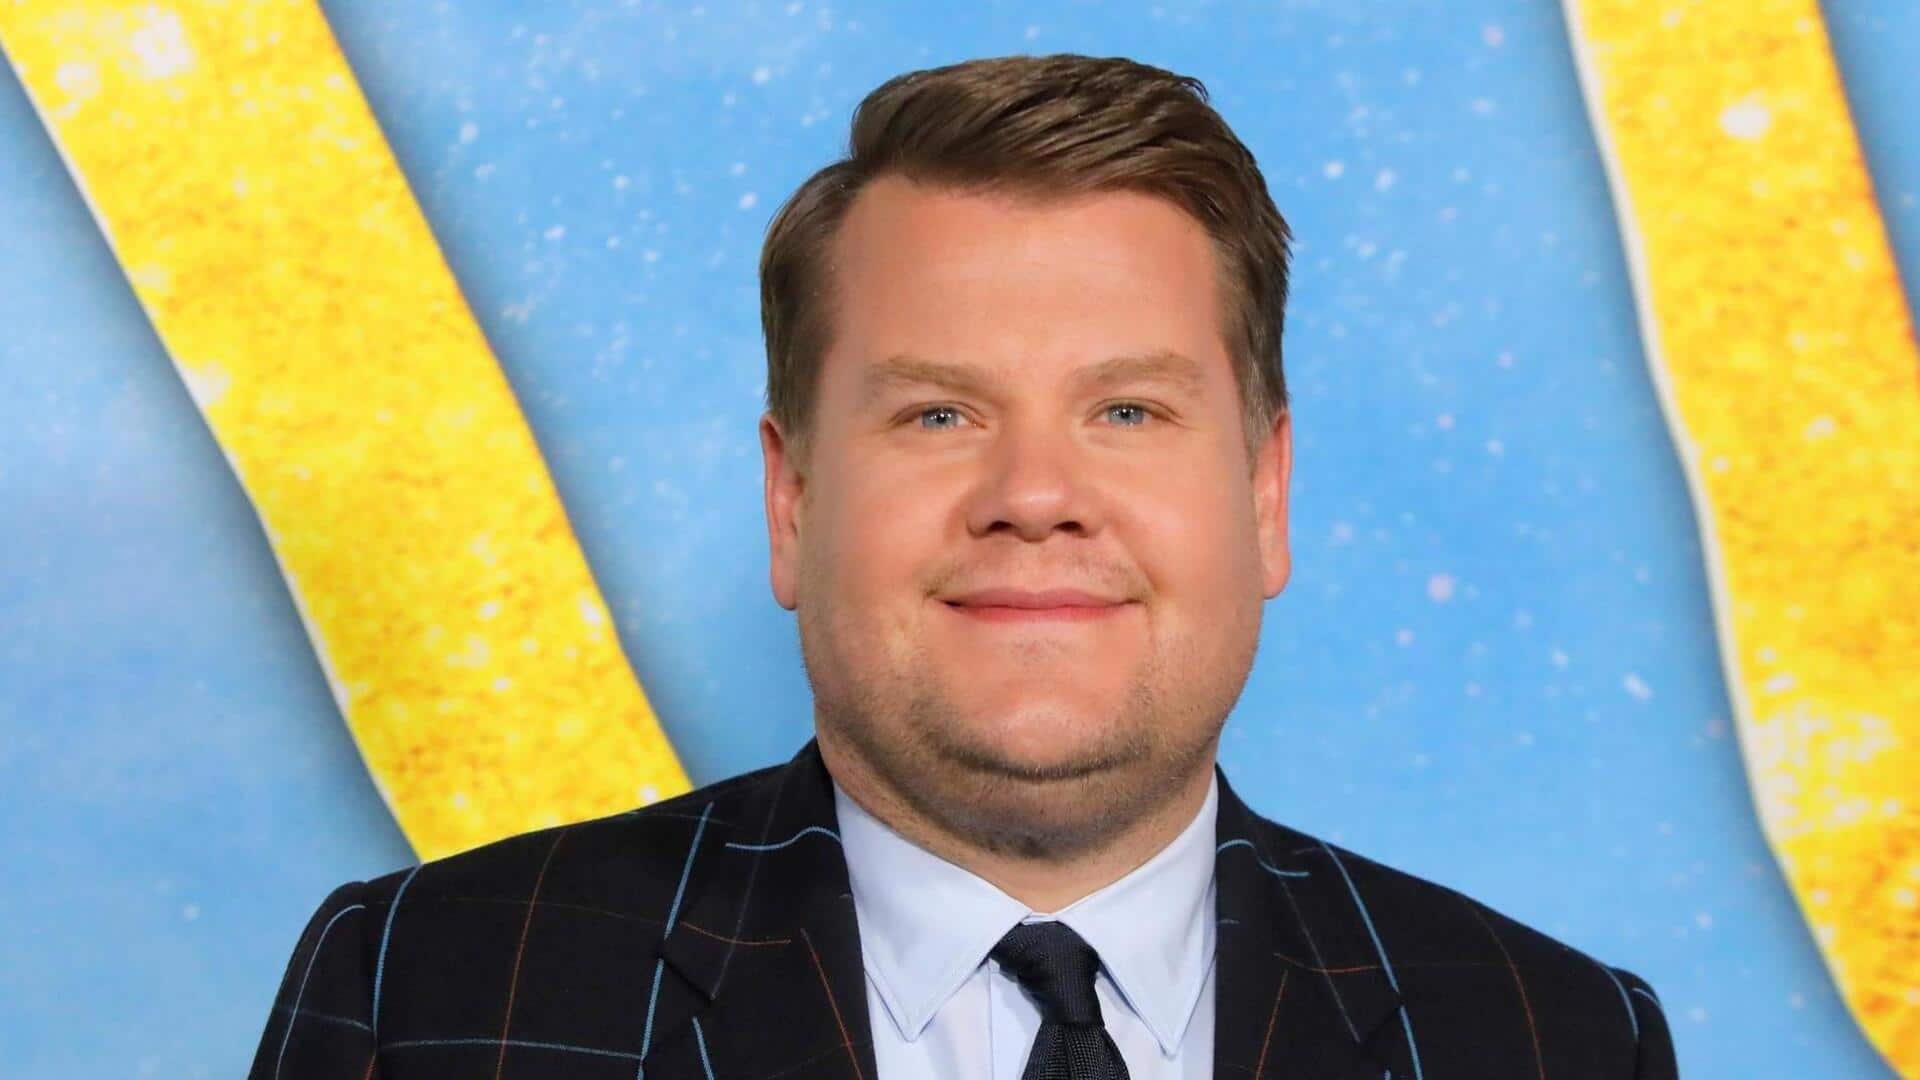 James Corden's first interview since 'Late Late Show' coming up